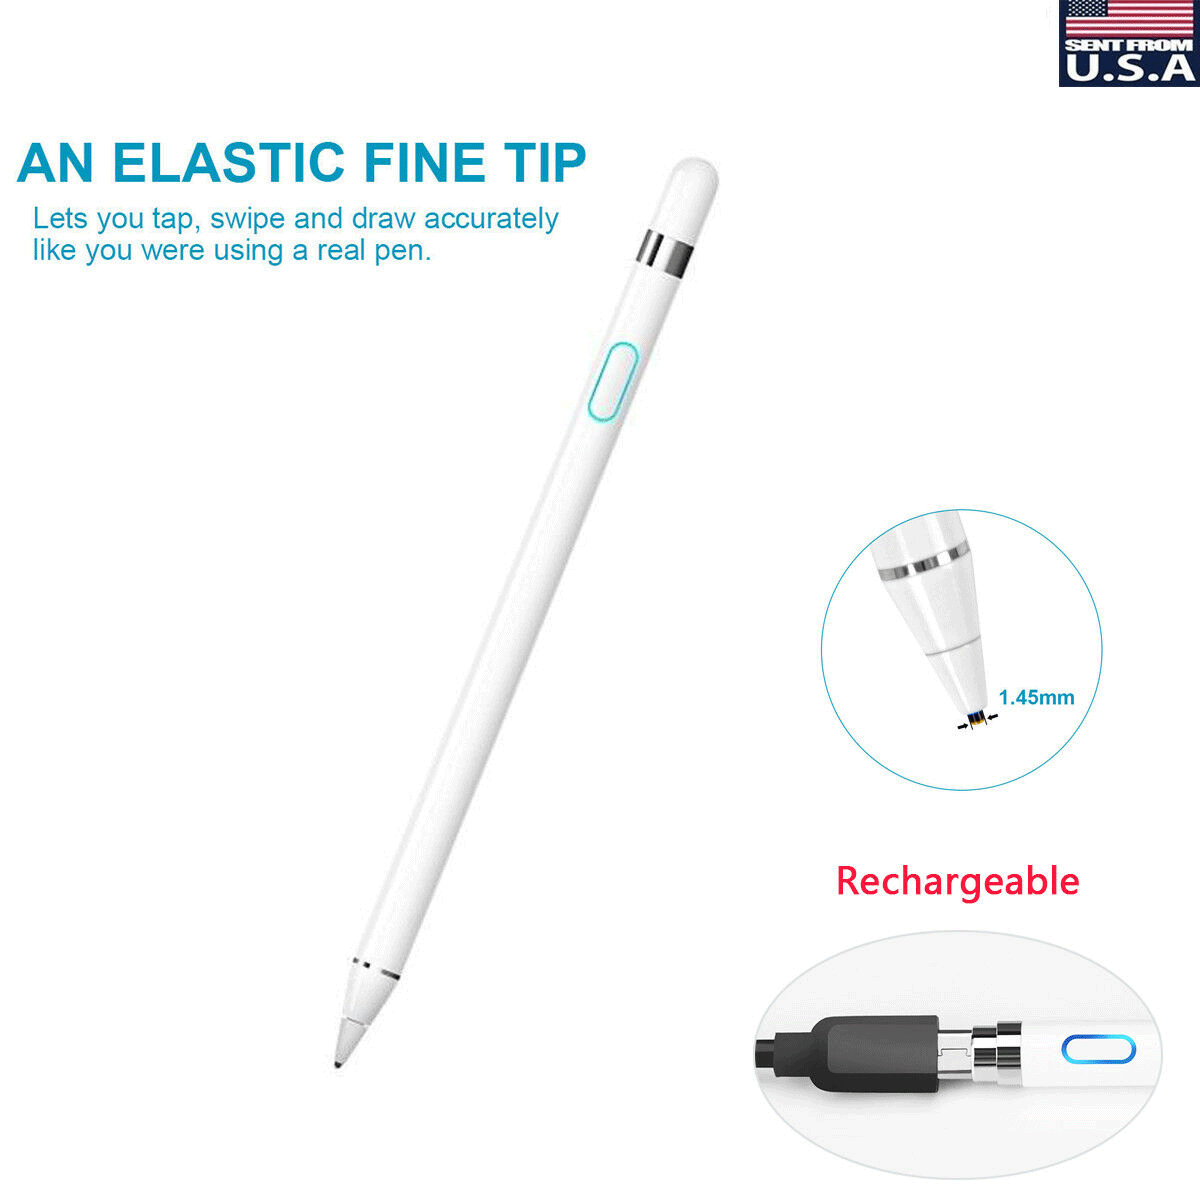 Rechargeable Capacitive Touch Screen Pen Stylus For Iphone Ipad Ipod Samsung Pc